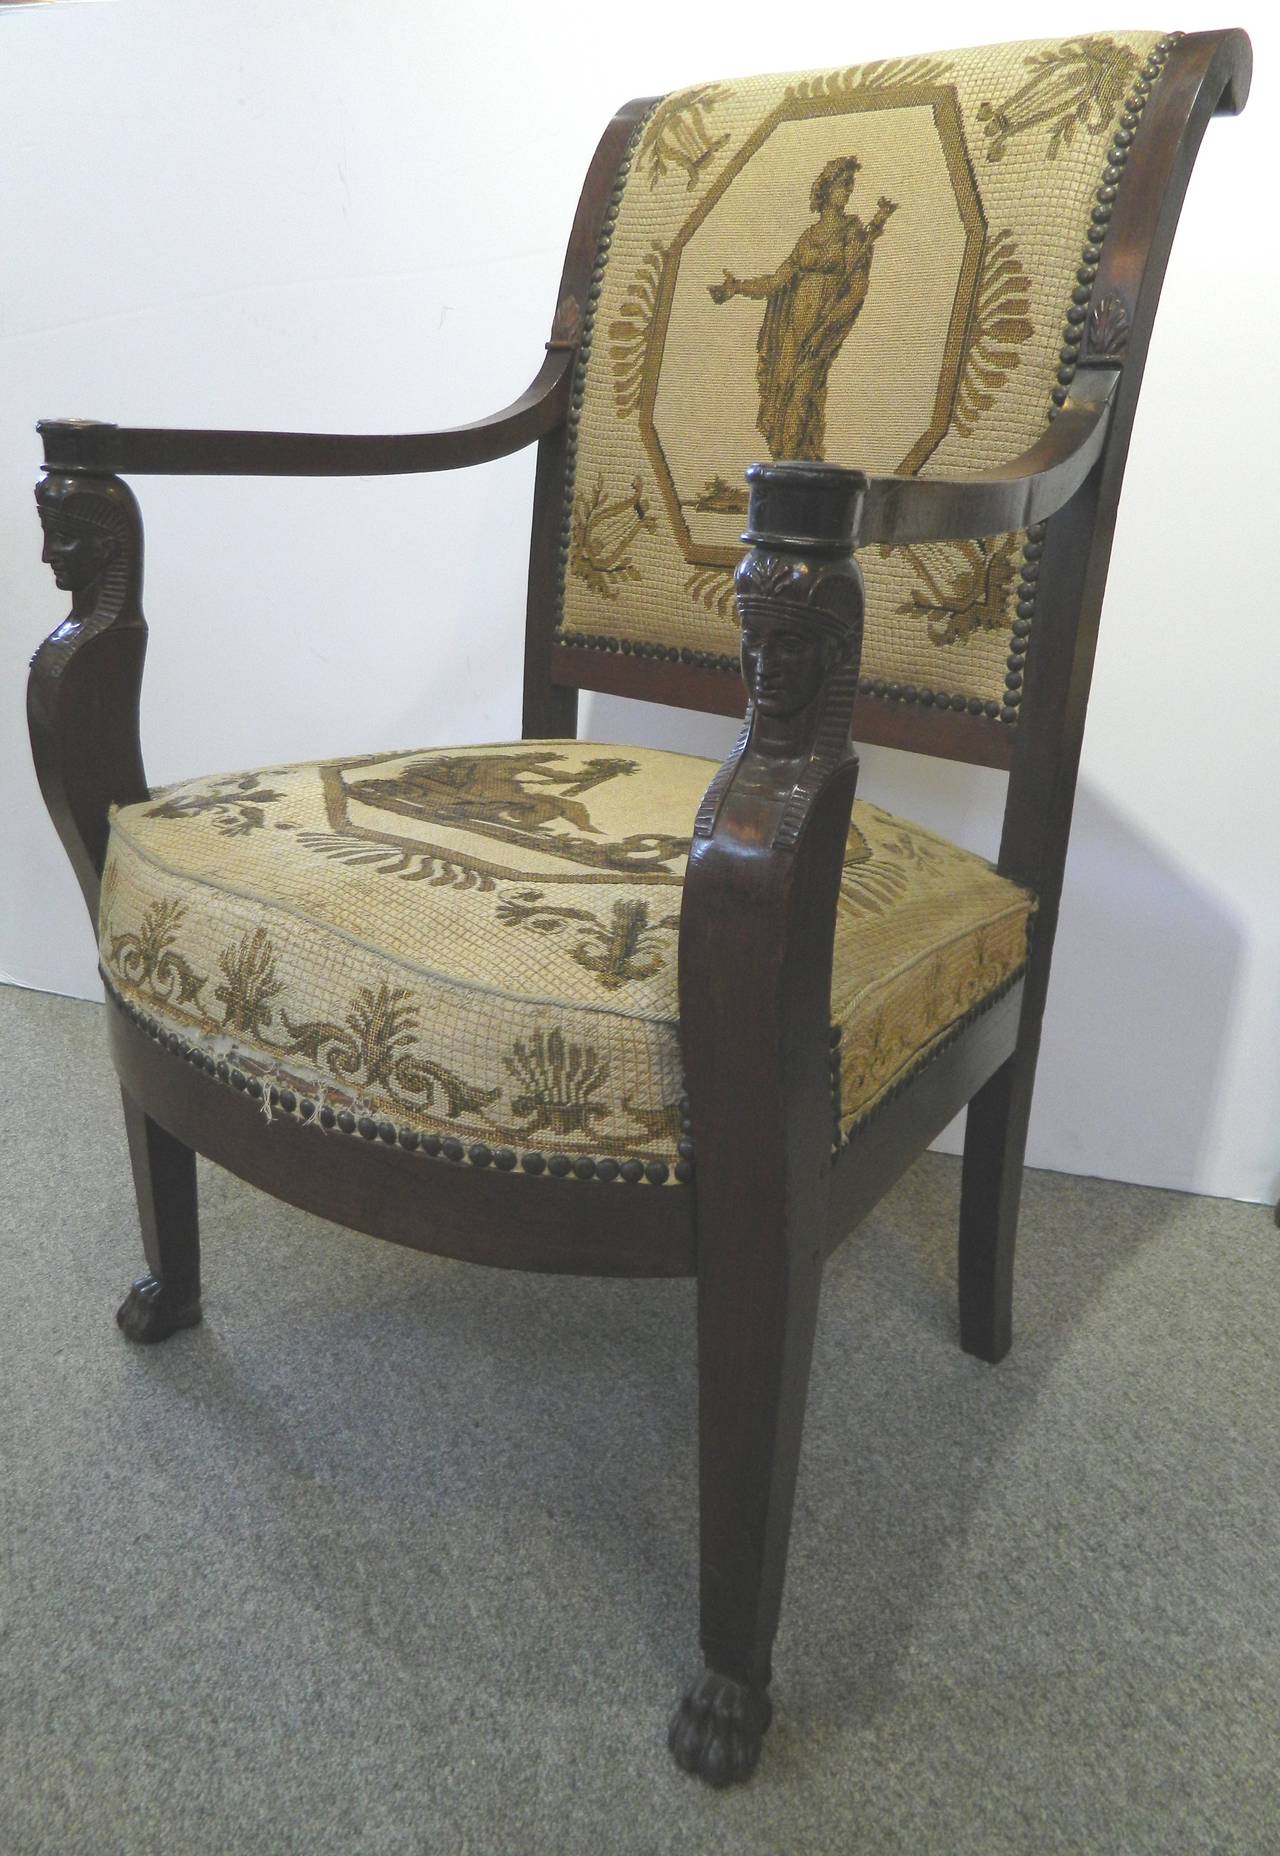 Great pair of mahogany Greek Revival armchairs with Spinx head supports  terminating in paw feet. The needlepoint upholstery is hand done and has some flaws.  Circa 1820 to 30.